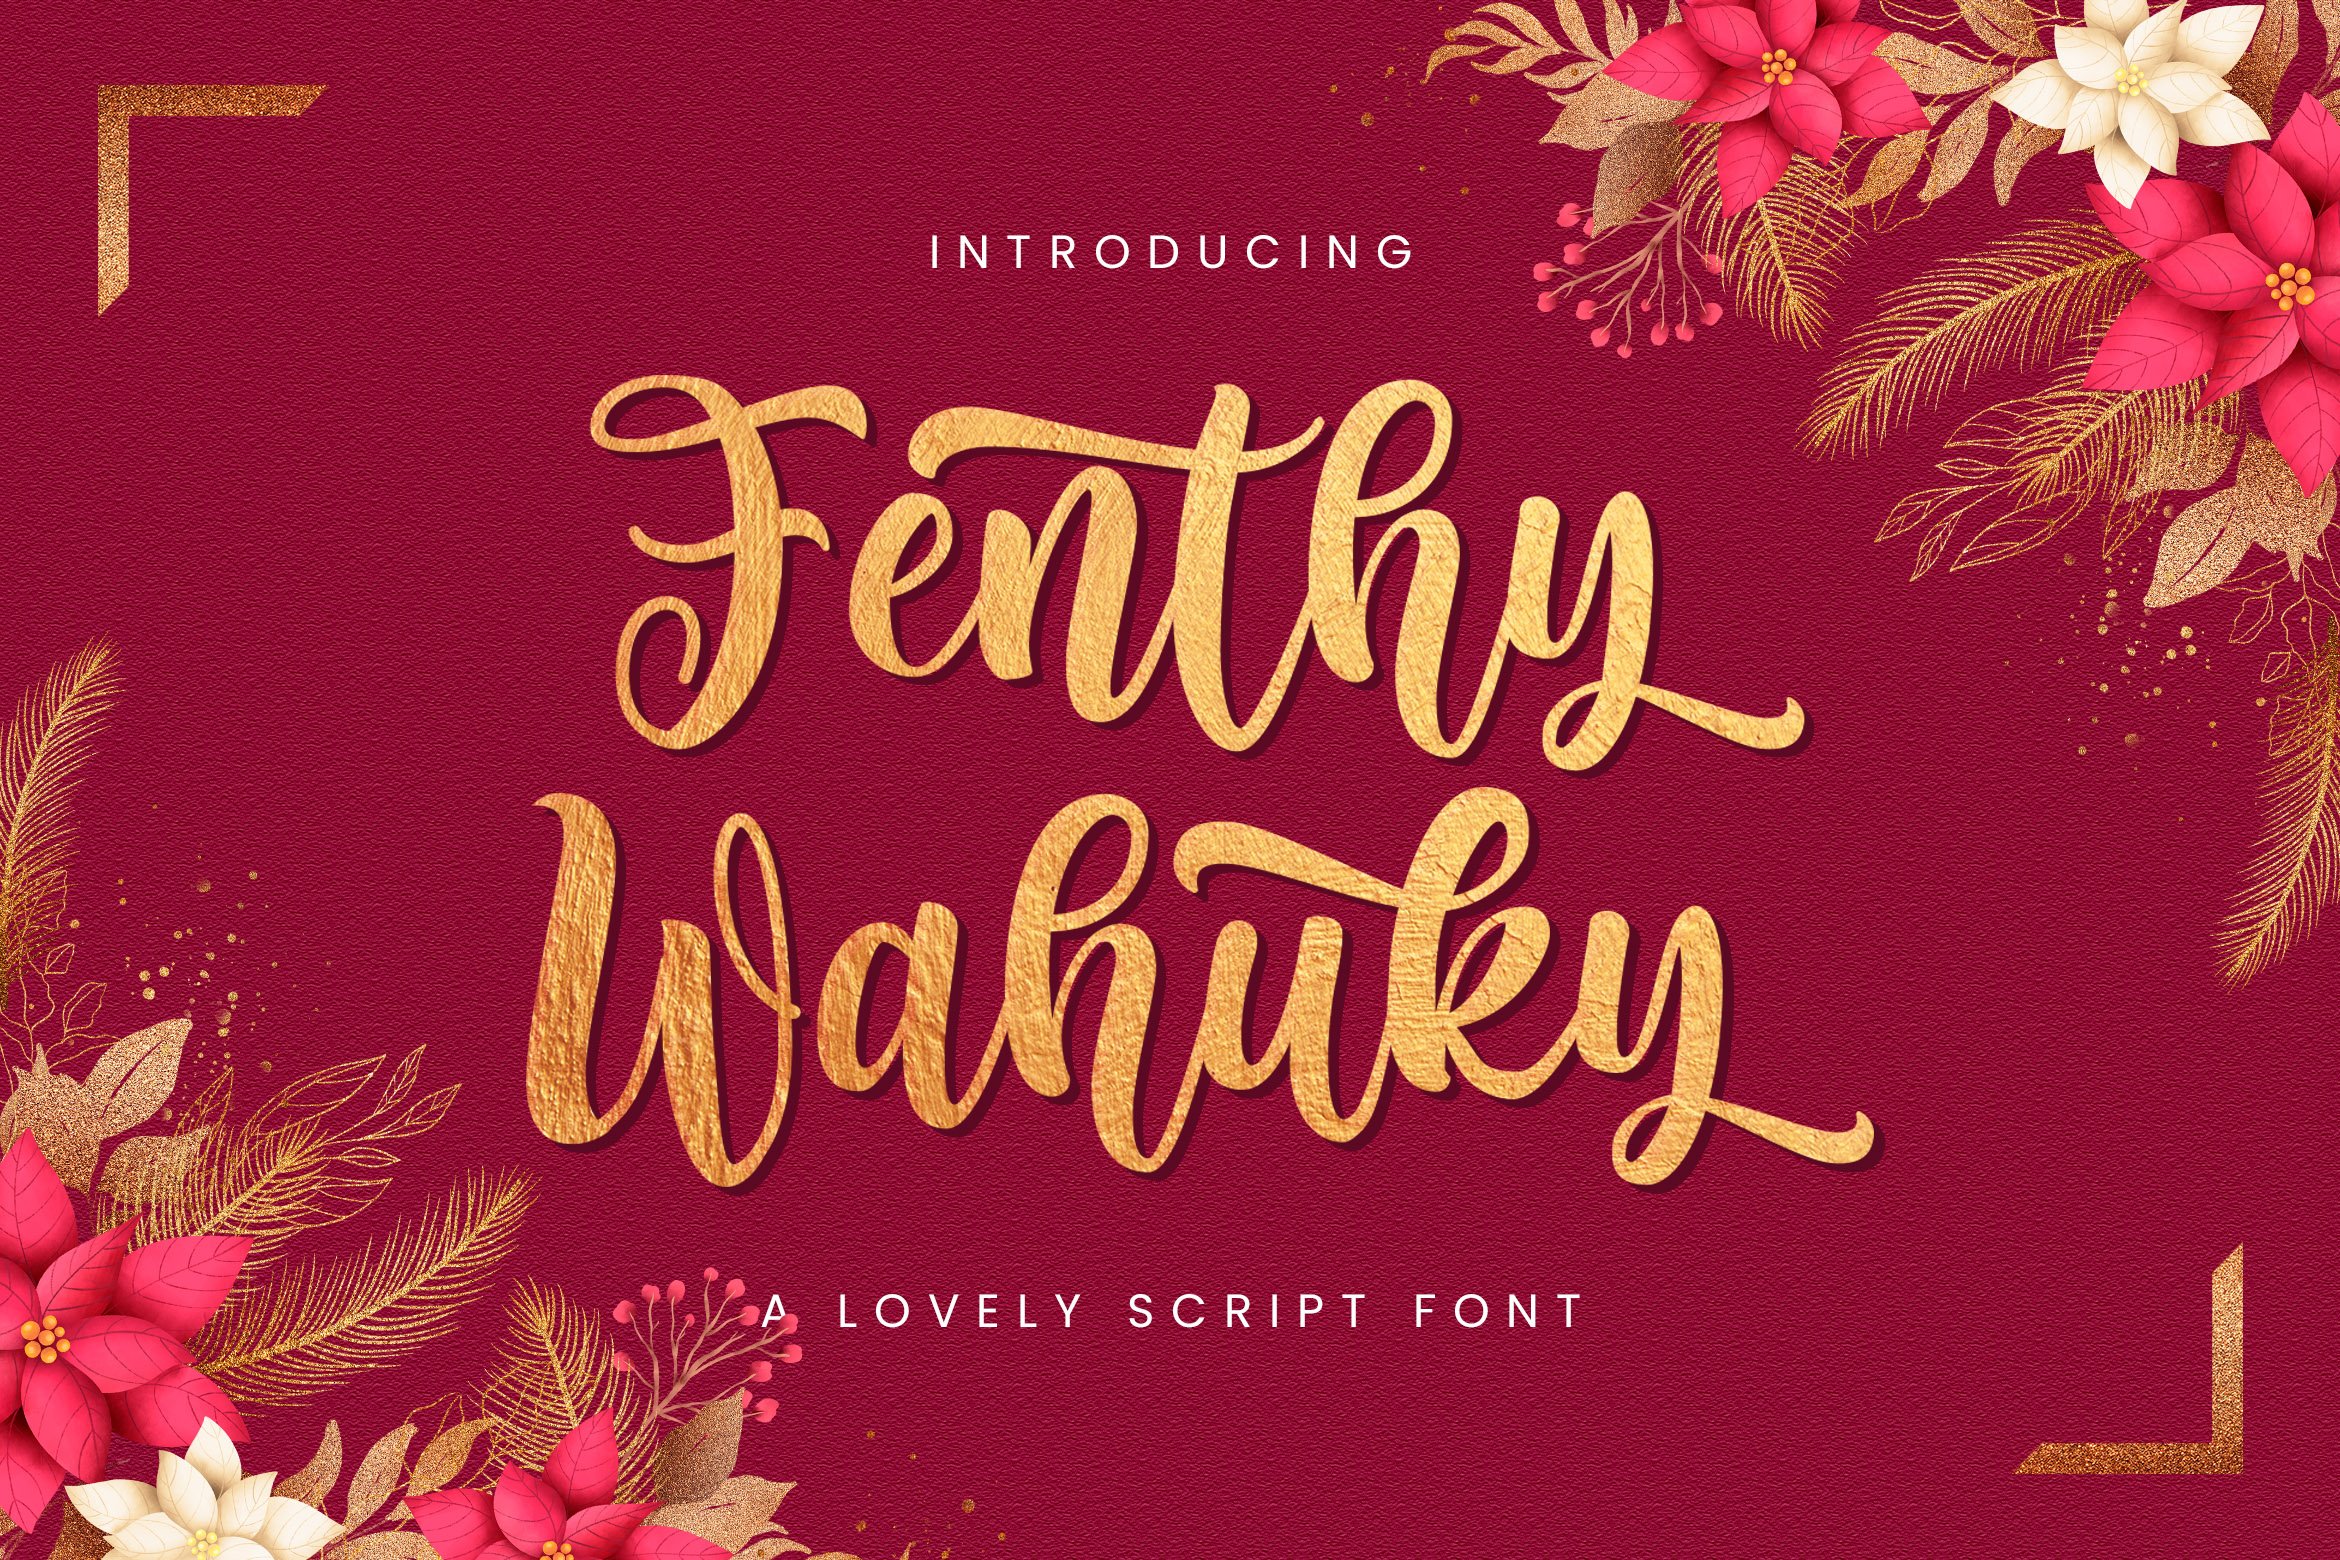 Fenthy Wahuky - Lovely Script Font cover image.